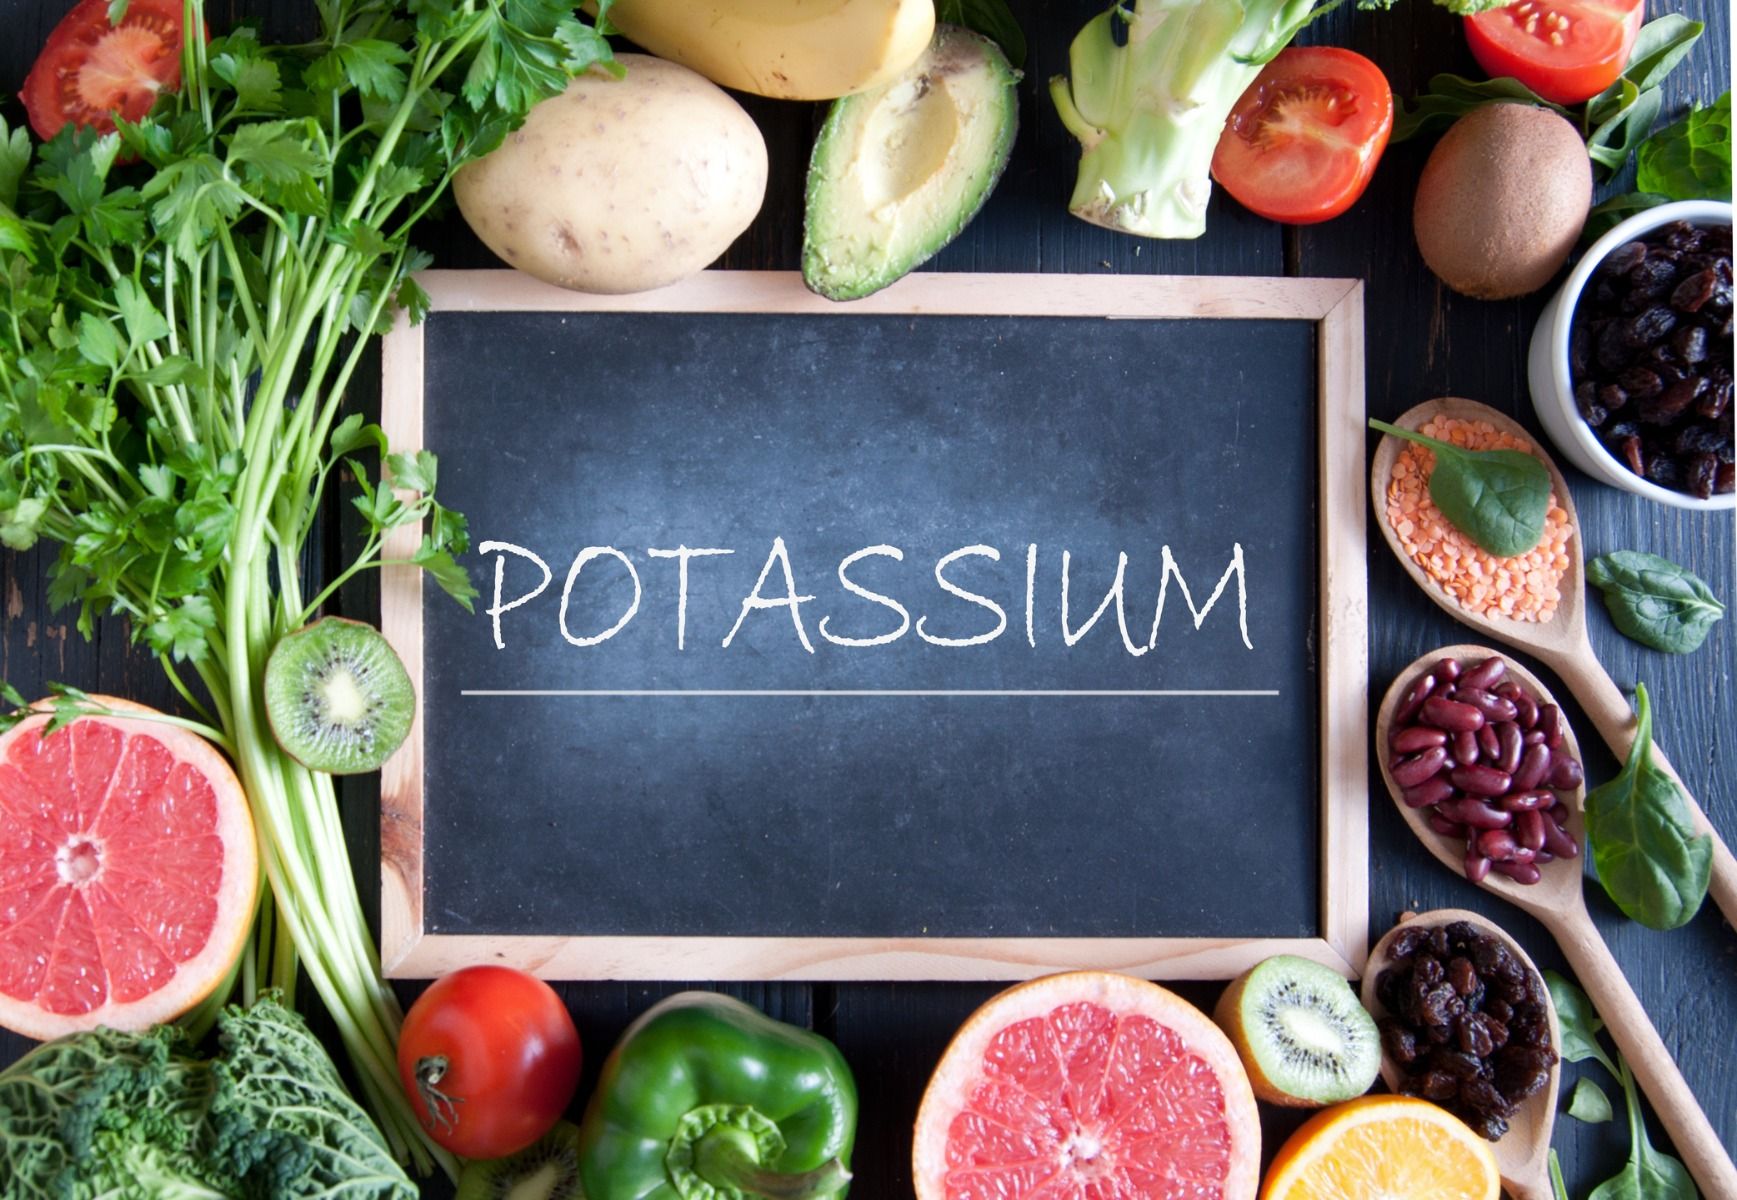 Potassium and its functions in the body